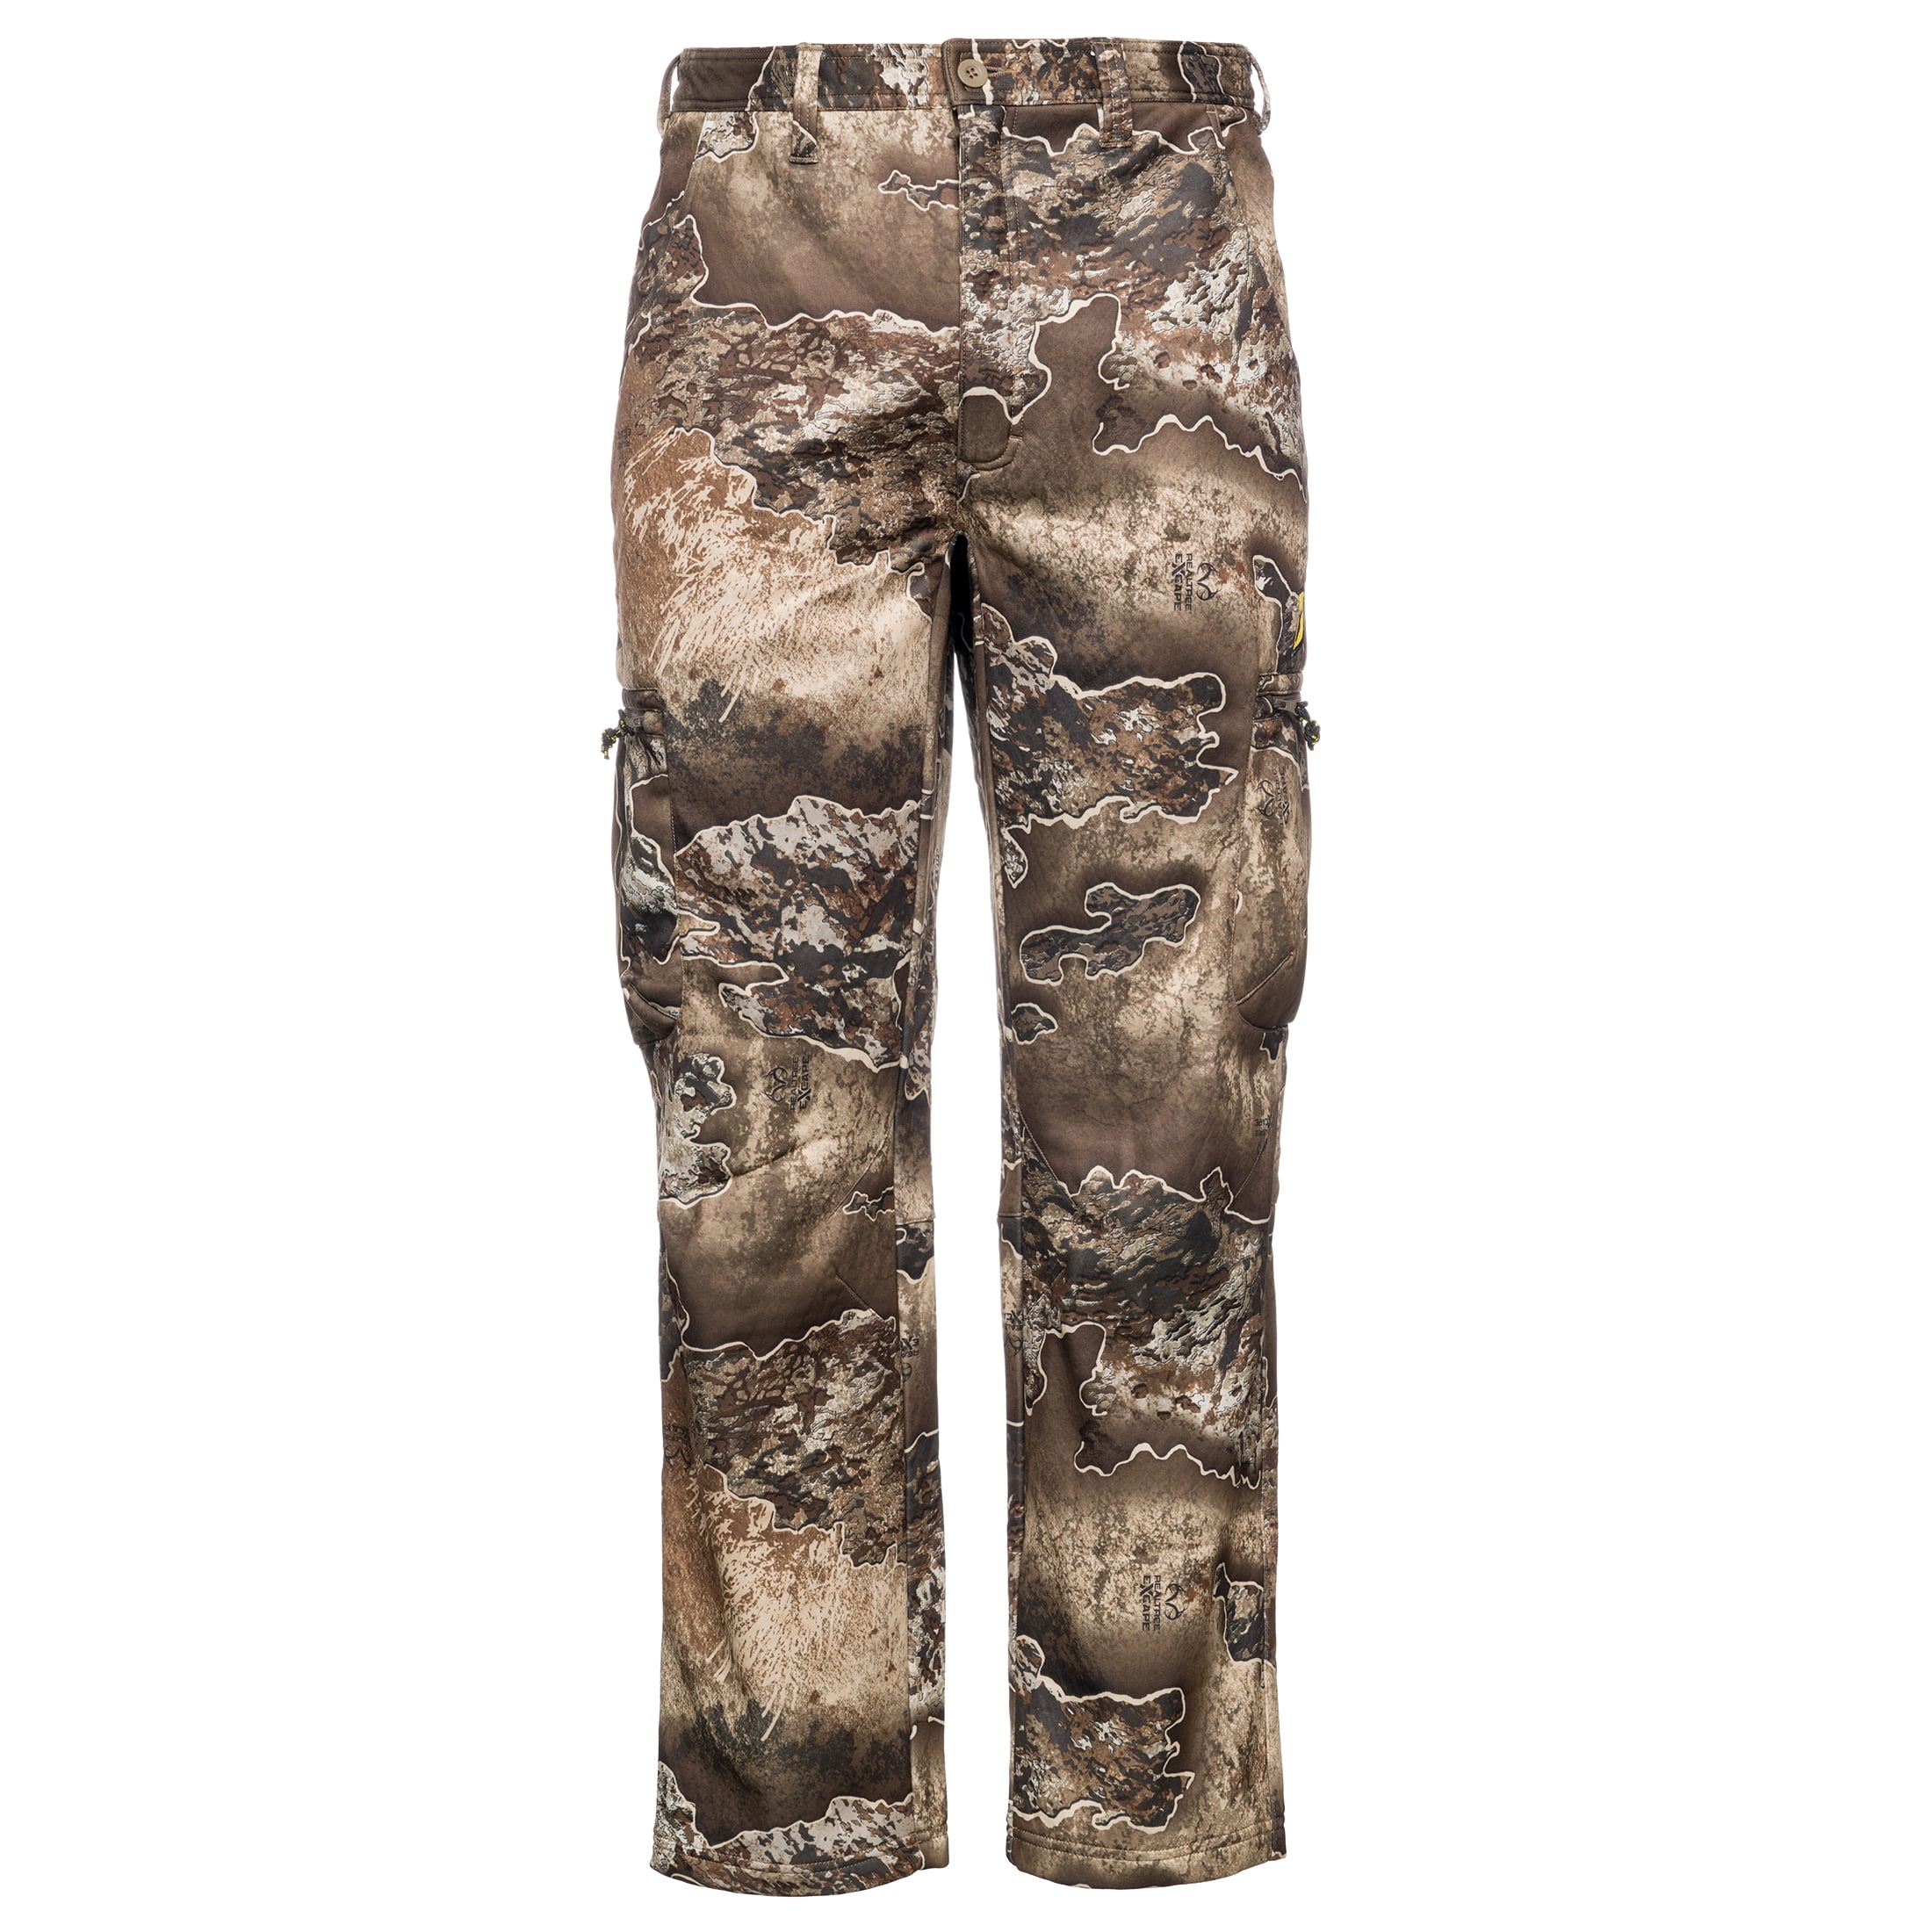 Realtree Hunting Cargo Pants Mens XXL 44-46 Flex Fabric New Camouflage 